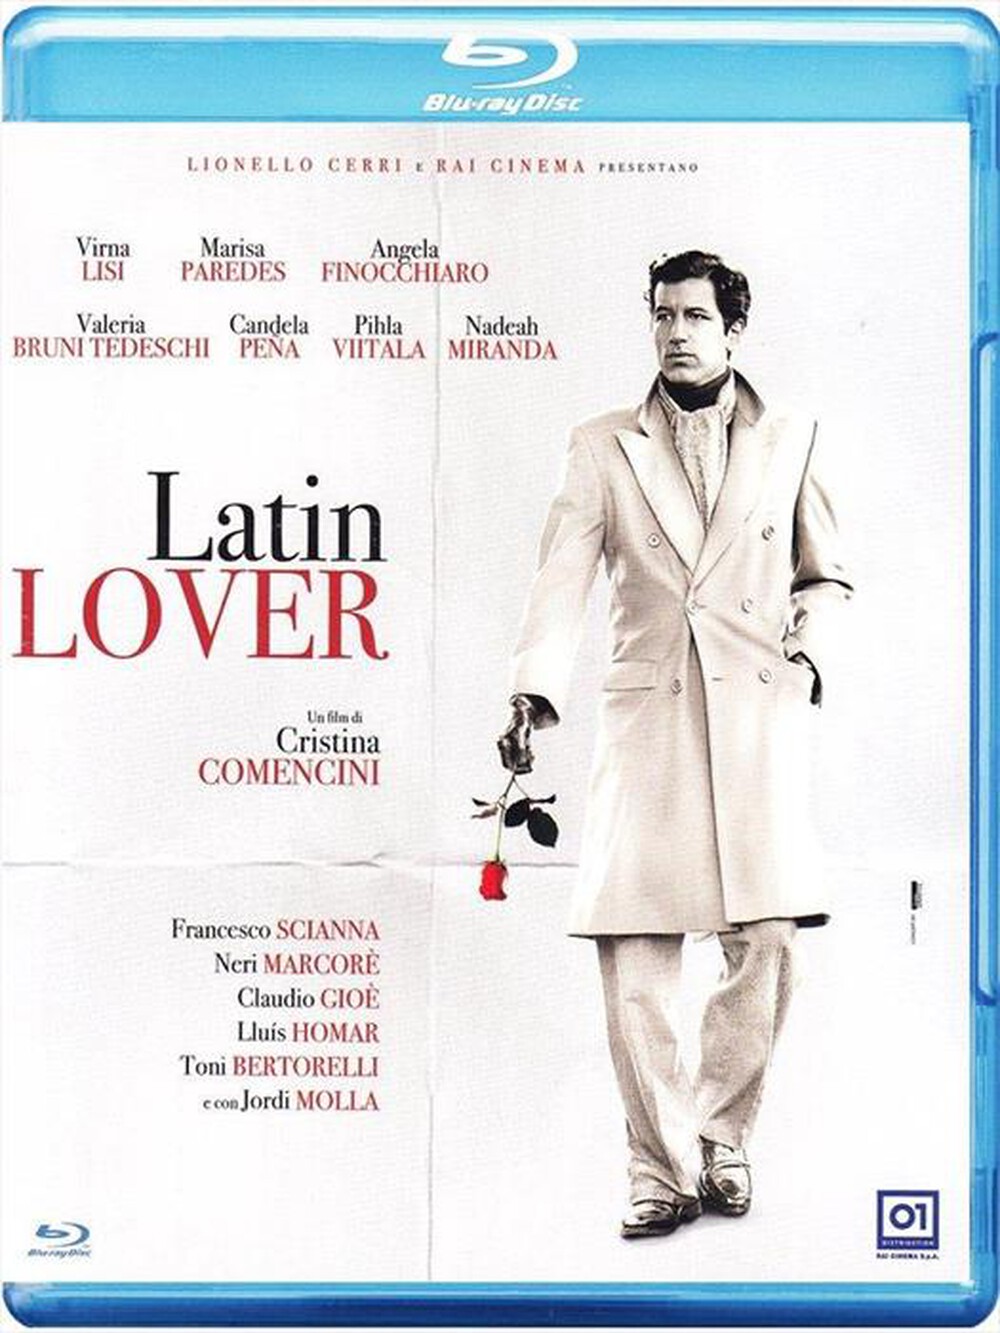 "EAGLE PICTURES - Latin Lover - "